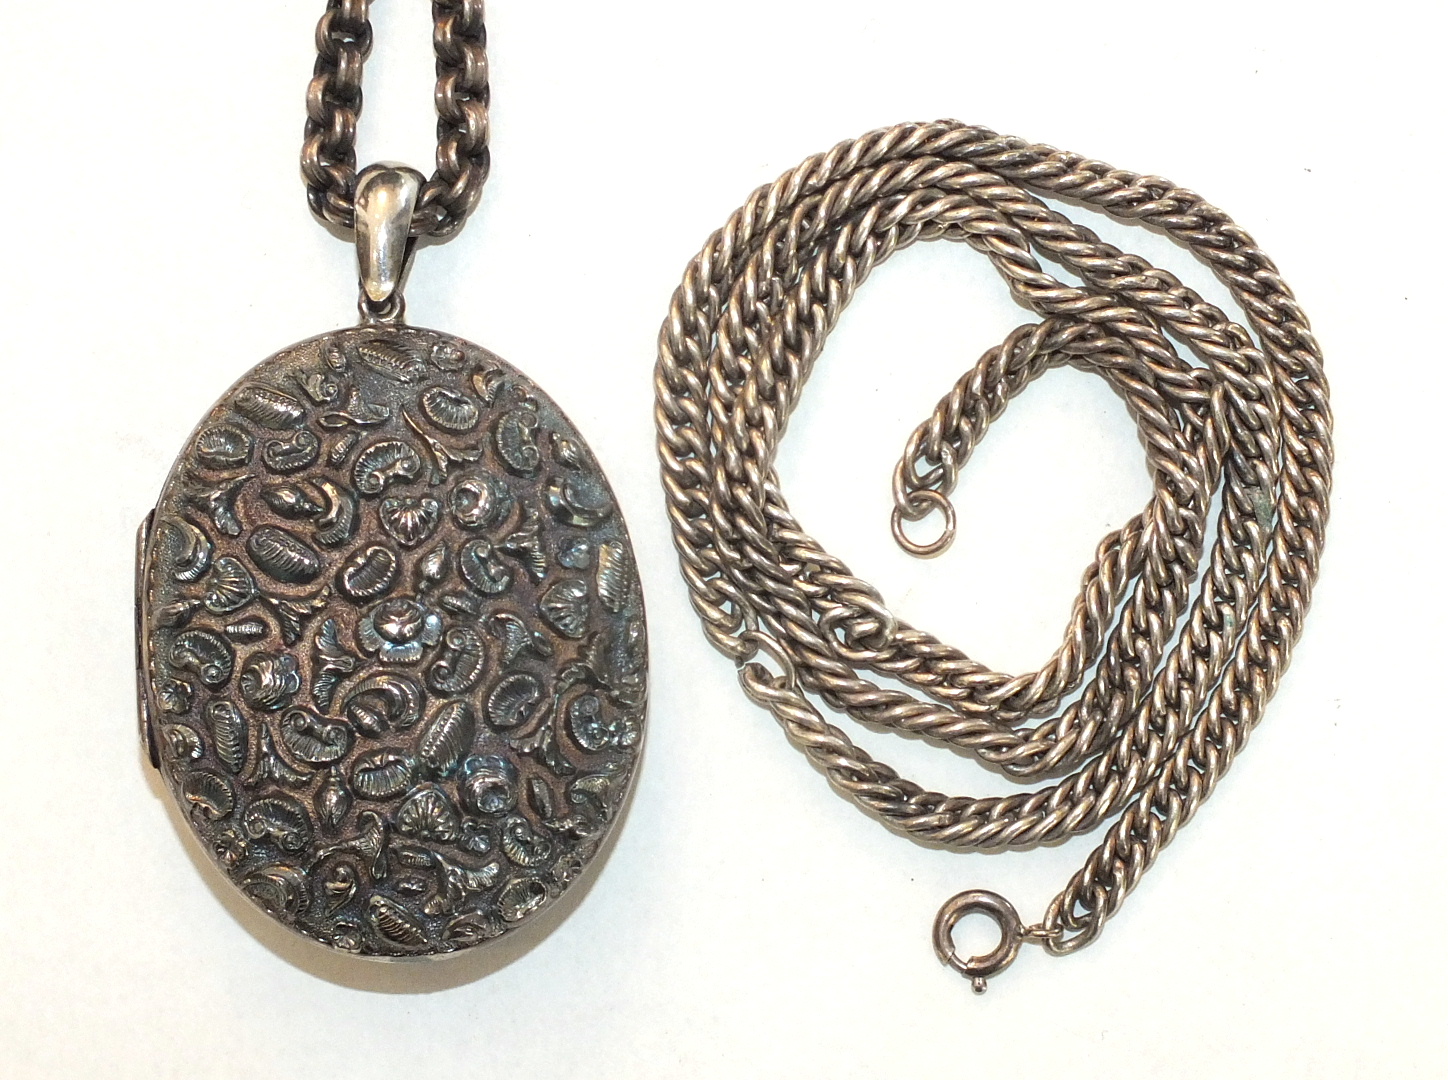 A large white metal locket embossed on both sides with flowers, leaves and shells, and two